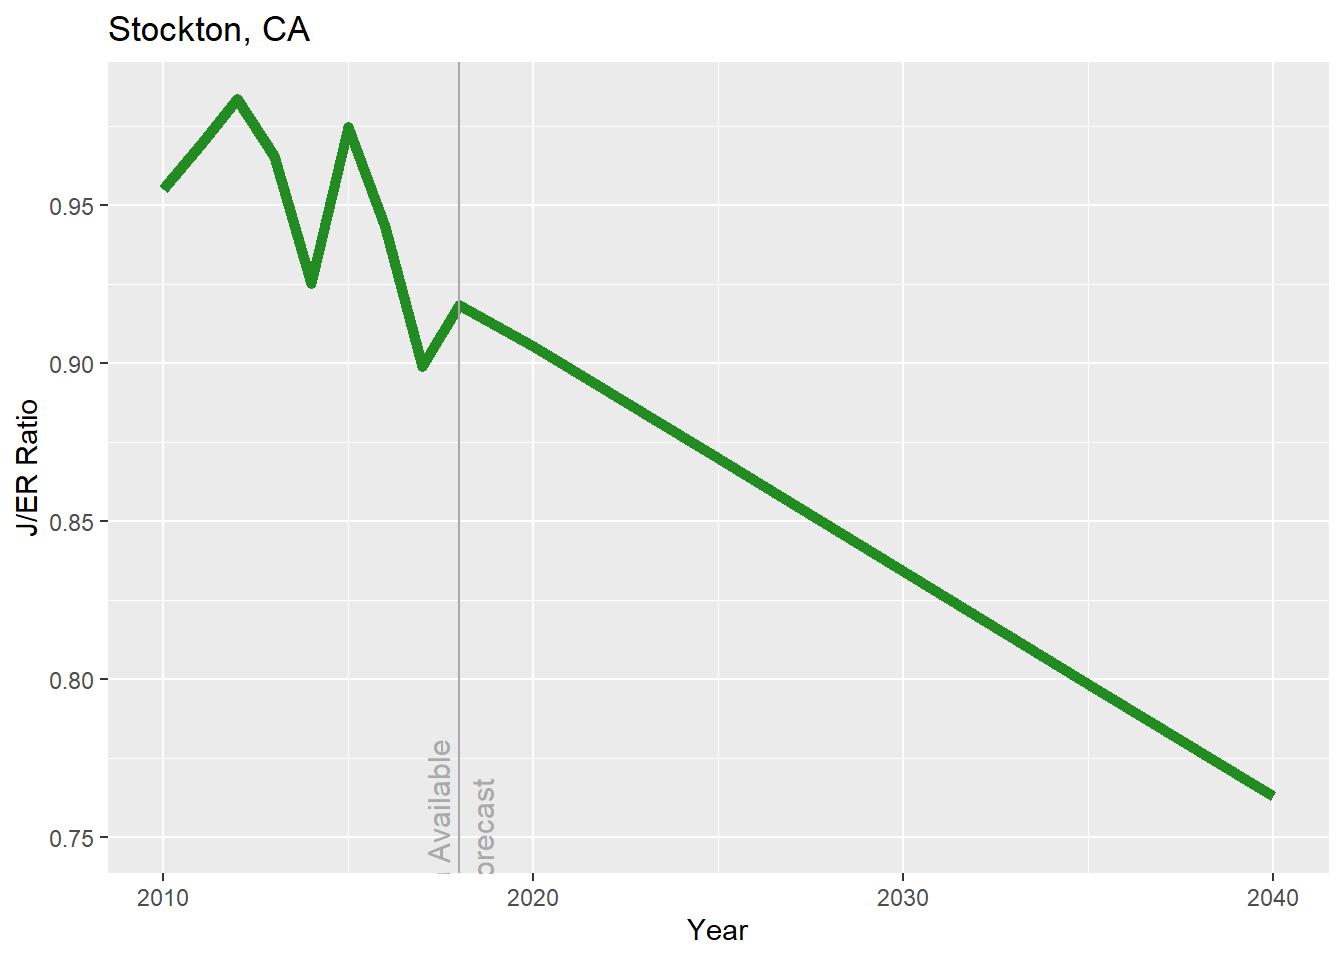 Historical jobs to employed residents ratio for Stockton 2010-2018, followed by projections to 2040.